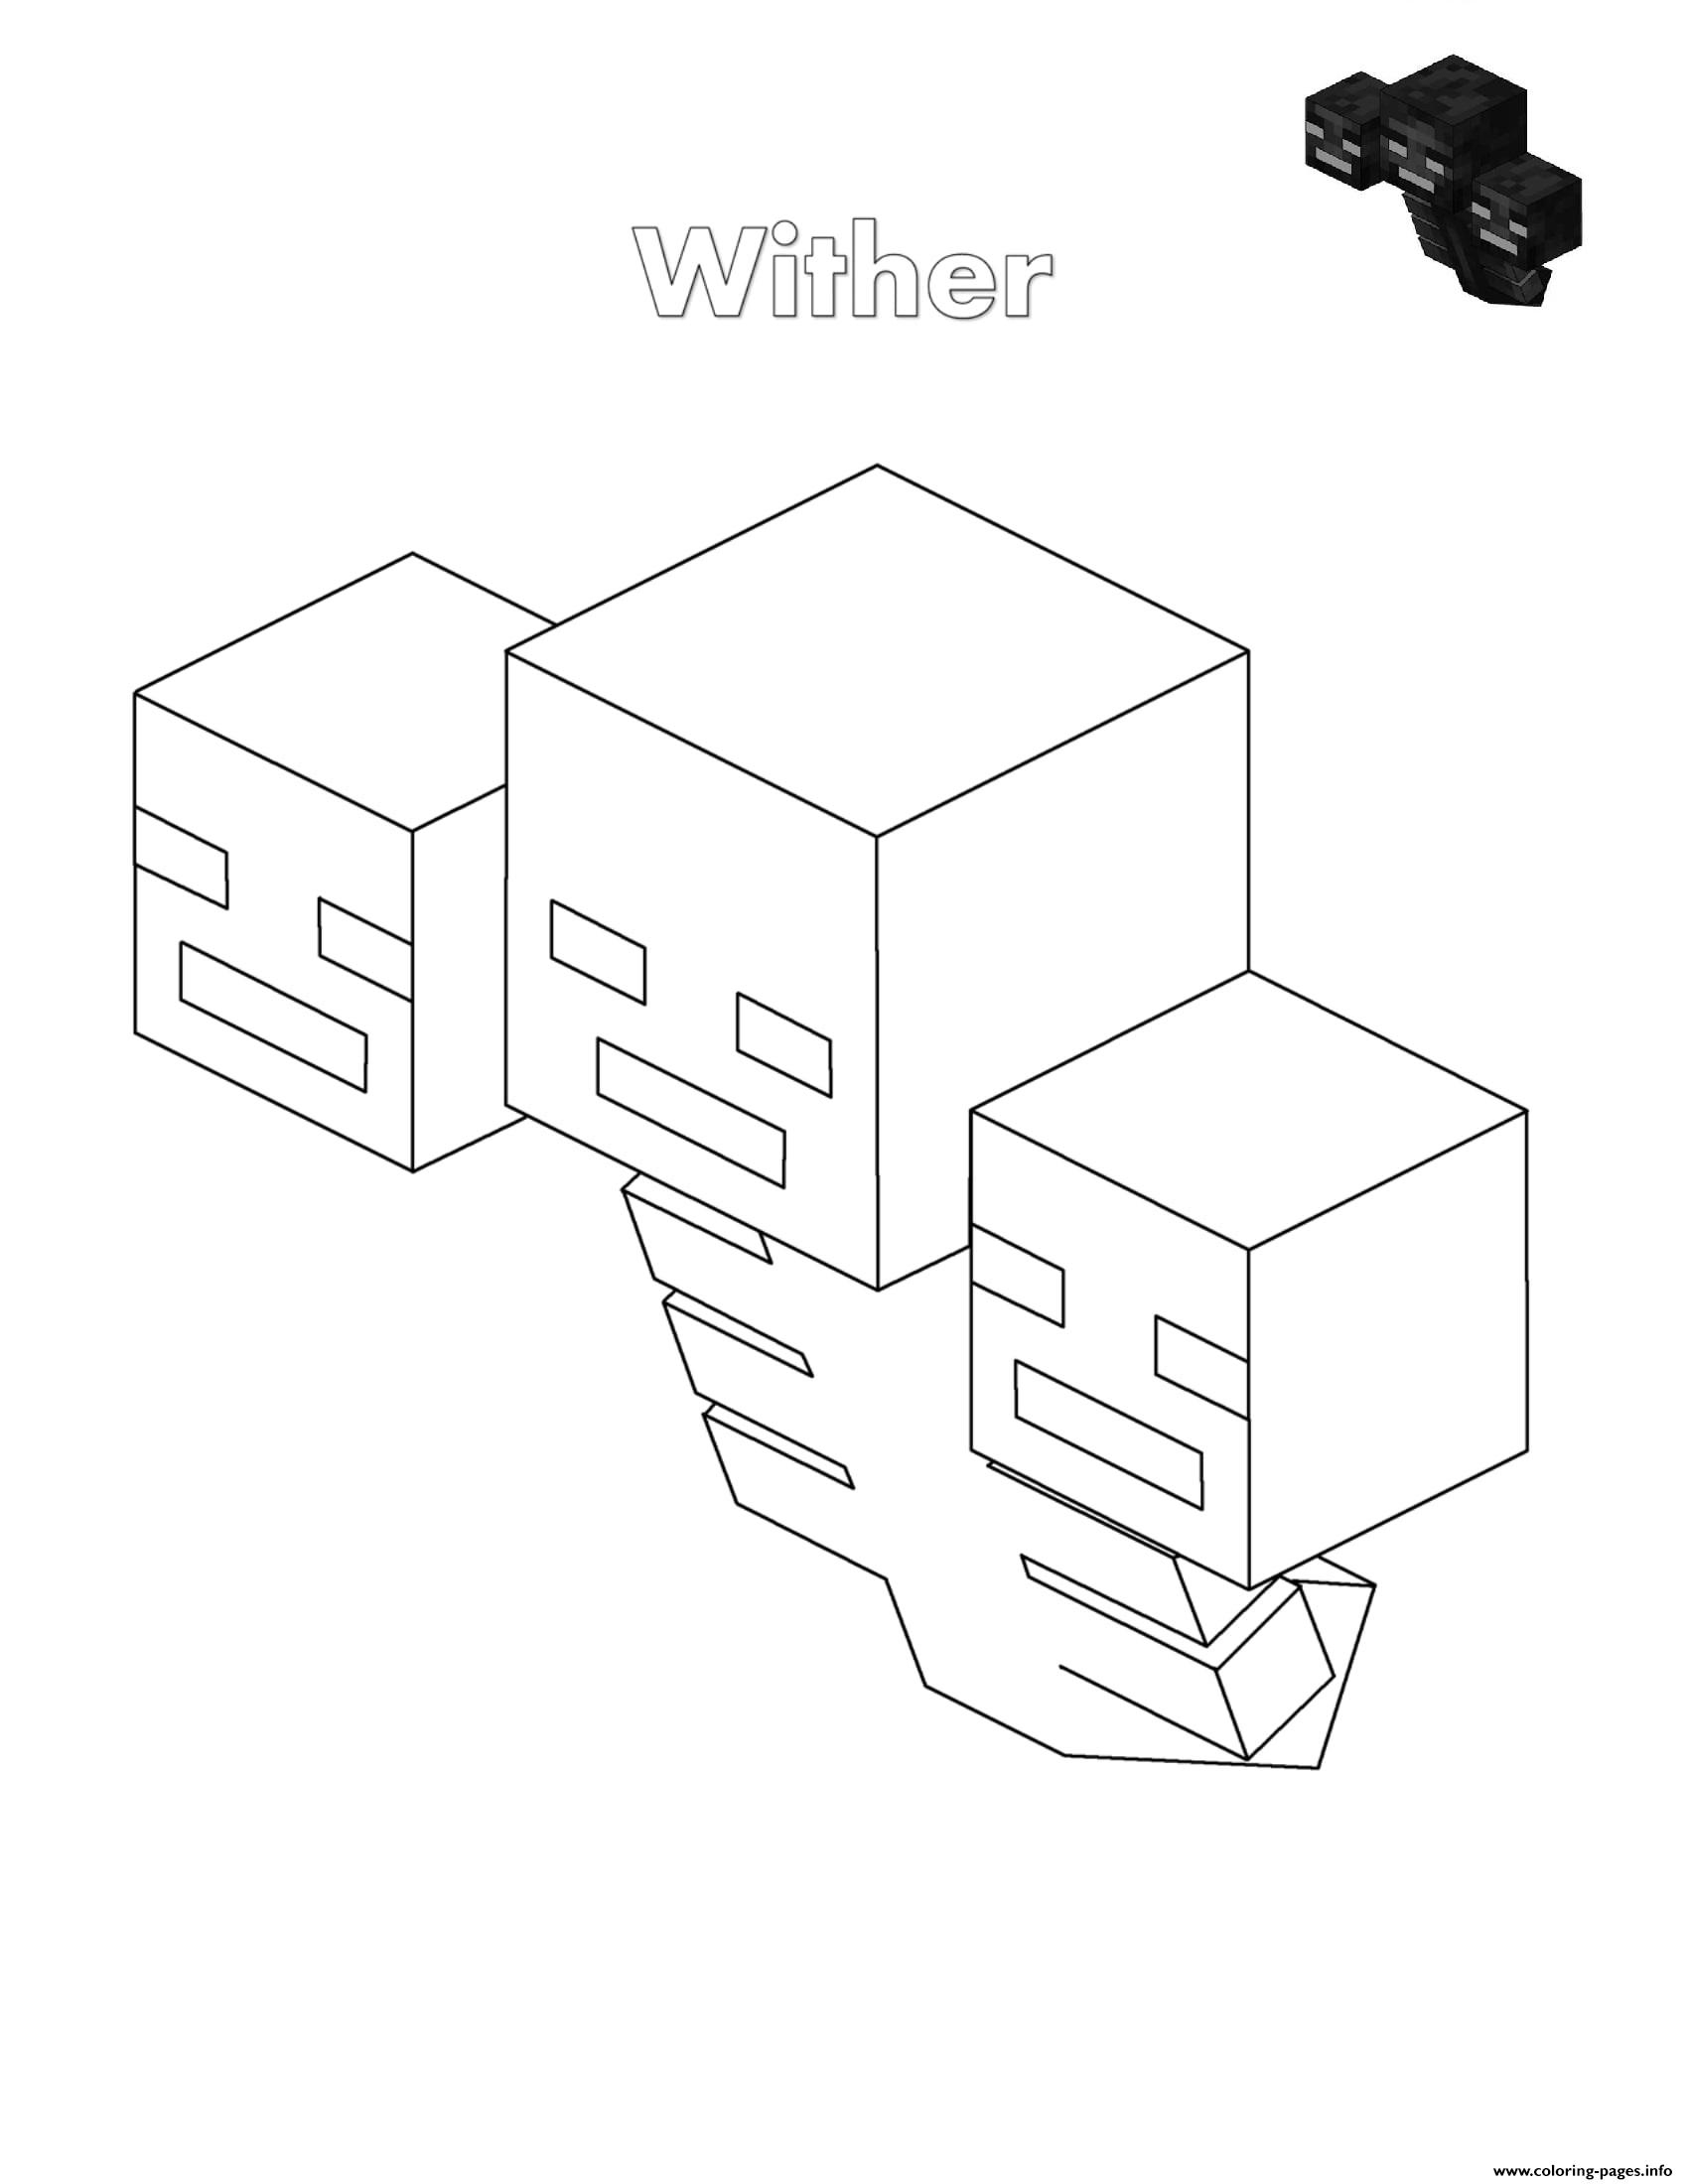 34 Minecraft Wither Coloring Pages - Zsksydny Coloring Pages avec Minecraft A Imprimer